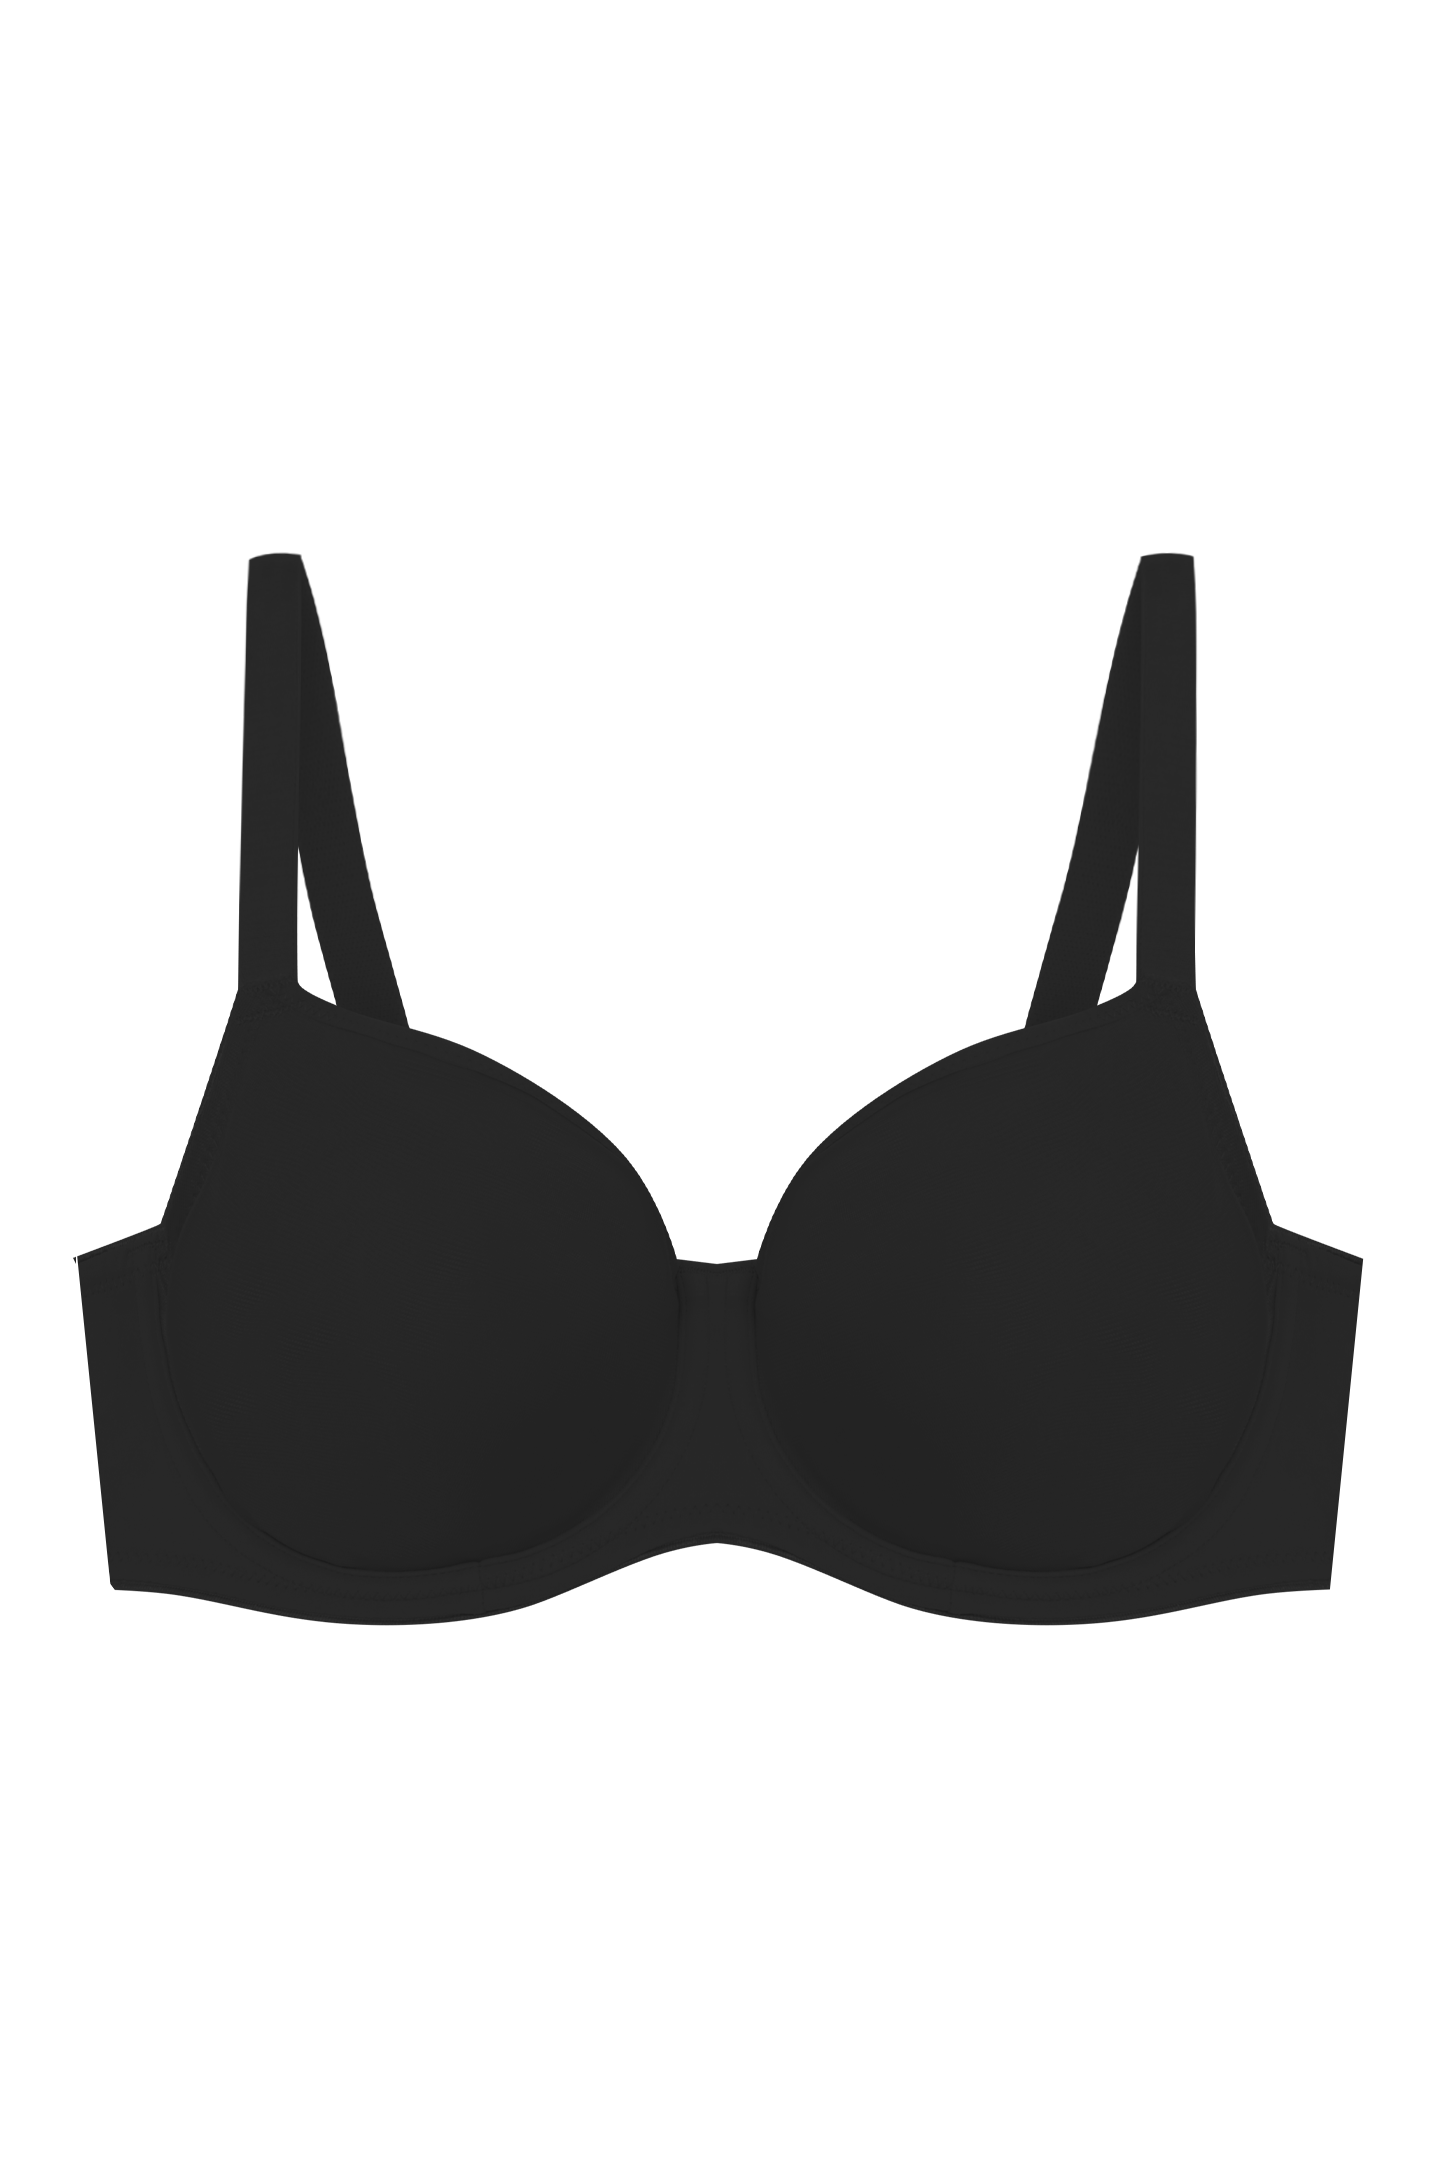 Buy EVERYDAY 3/4 SOFT CUP BRA online at Intimo